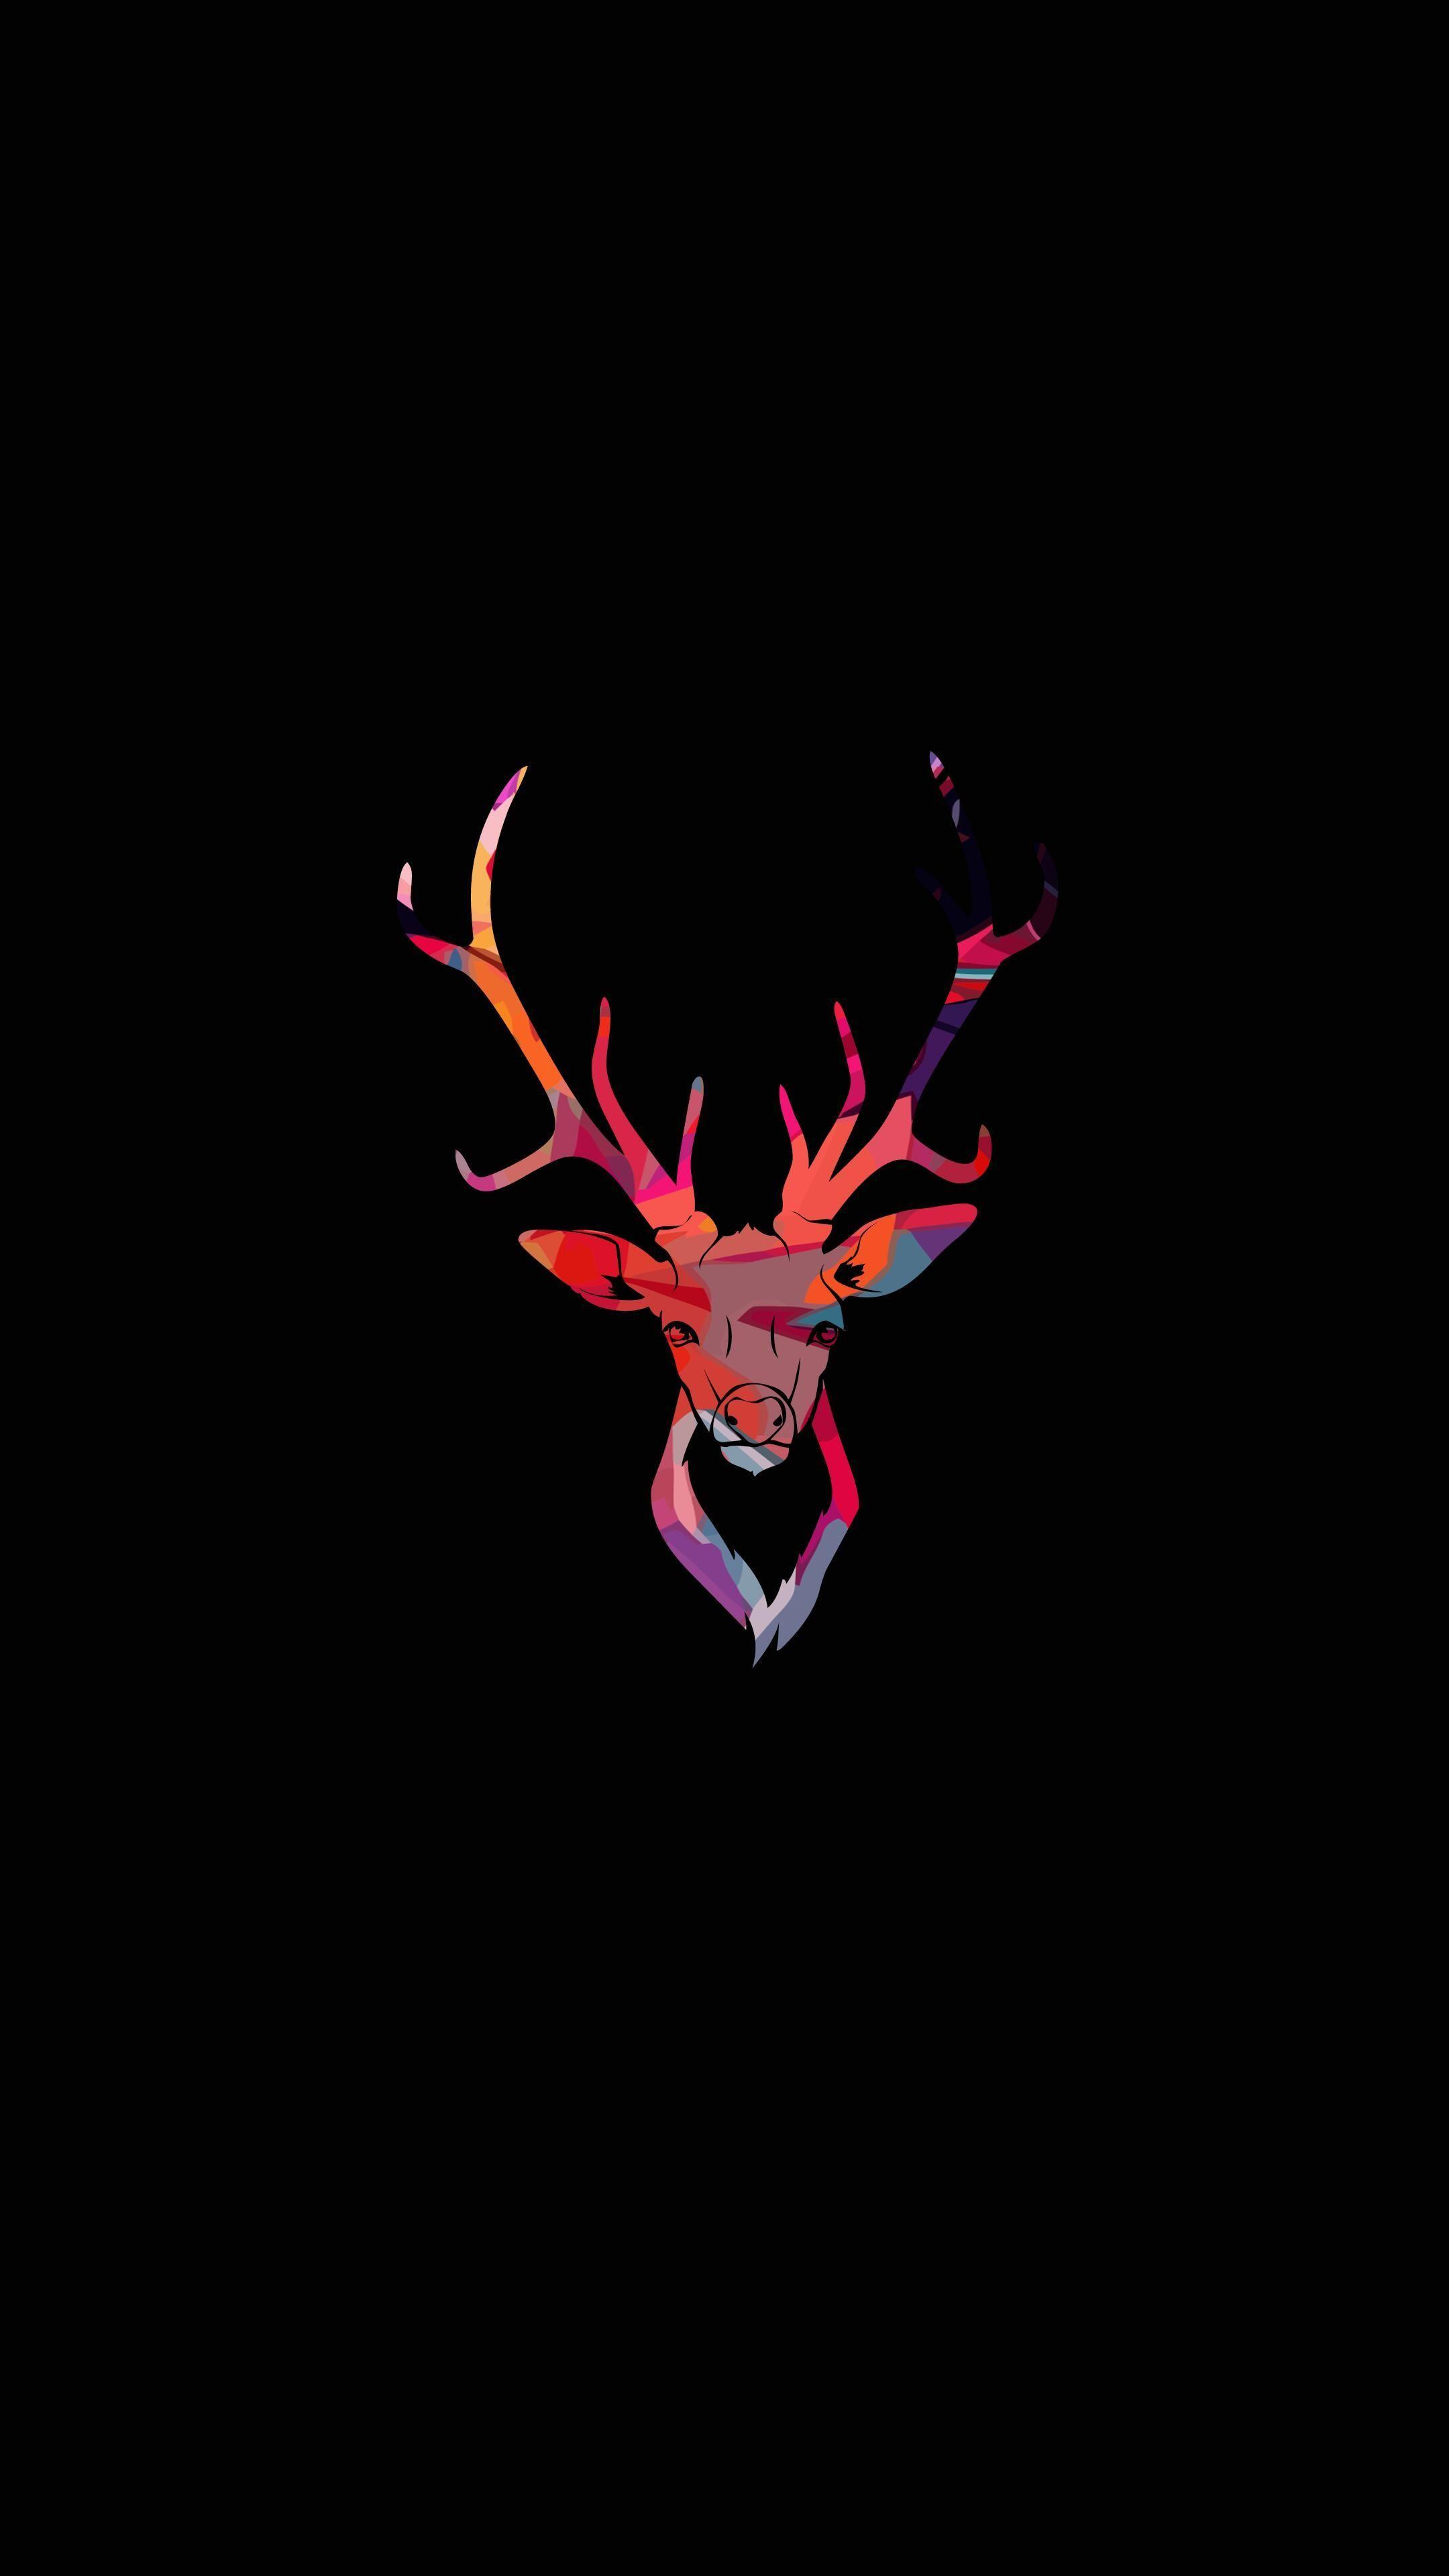 Abstract Deer Wallpapers Top Free Abstract Deer Backgrounds Images, Photos, Reviews